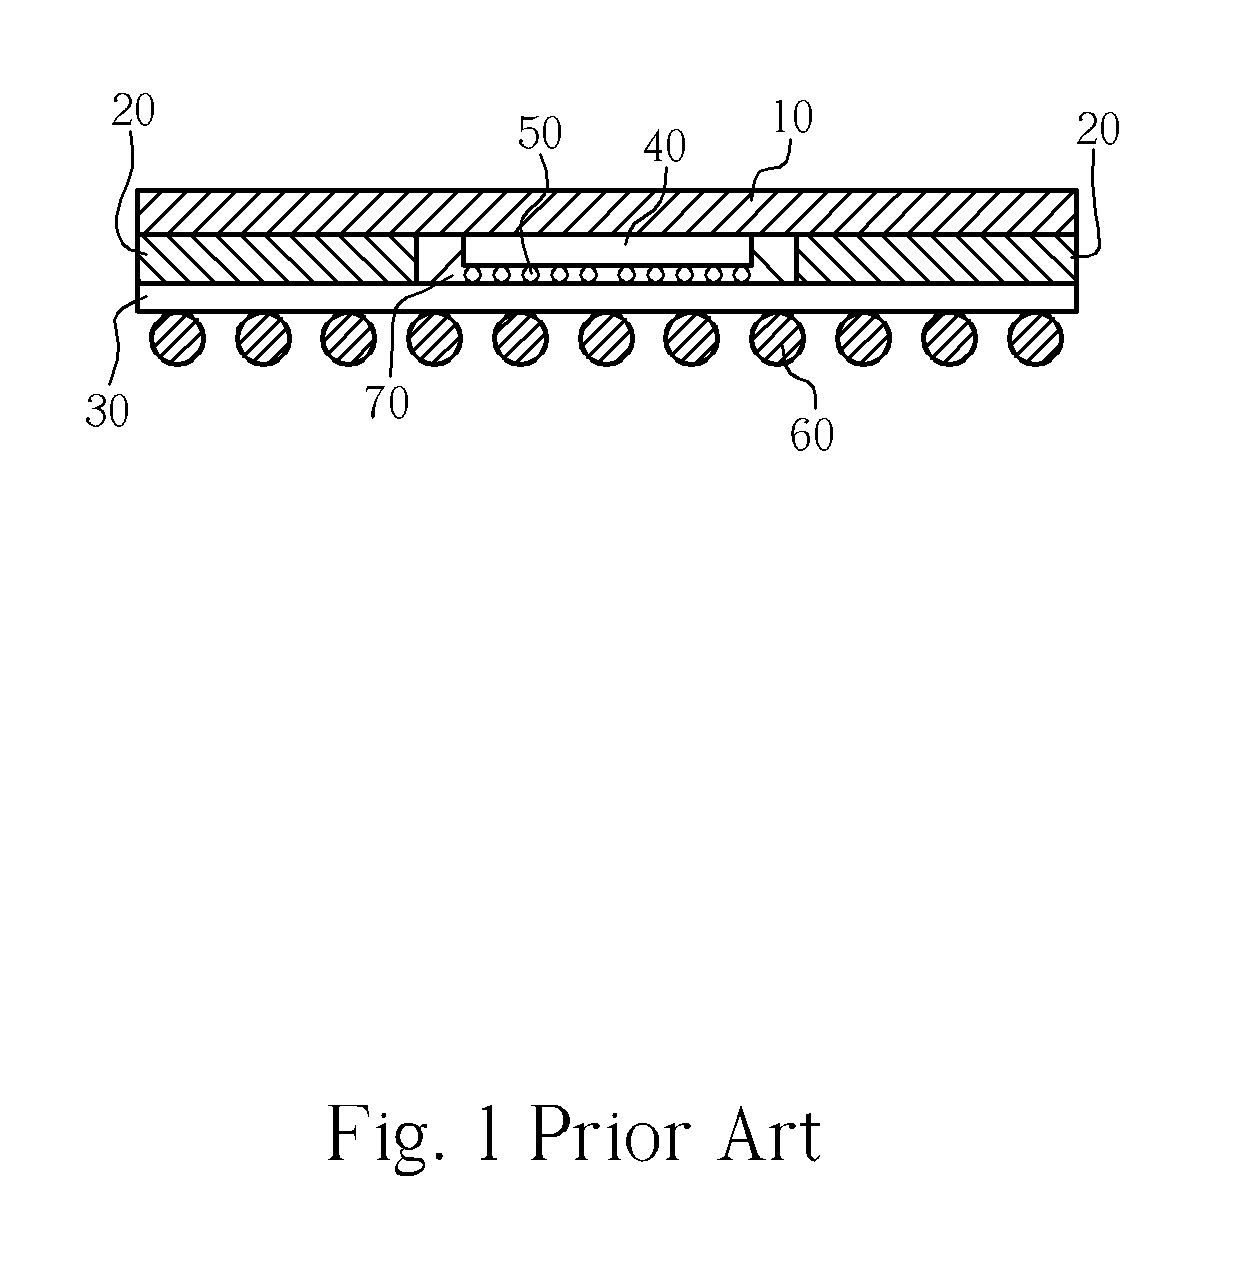 Flip-chip package structure with stiffener